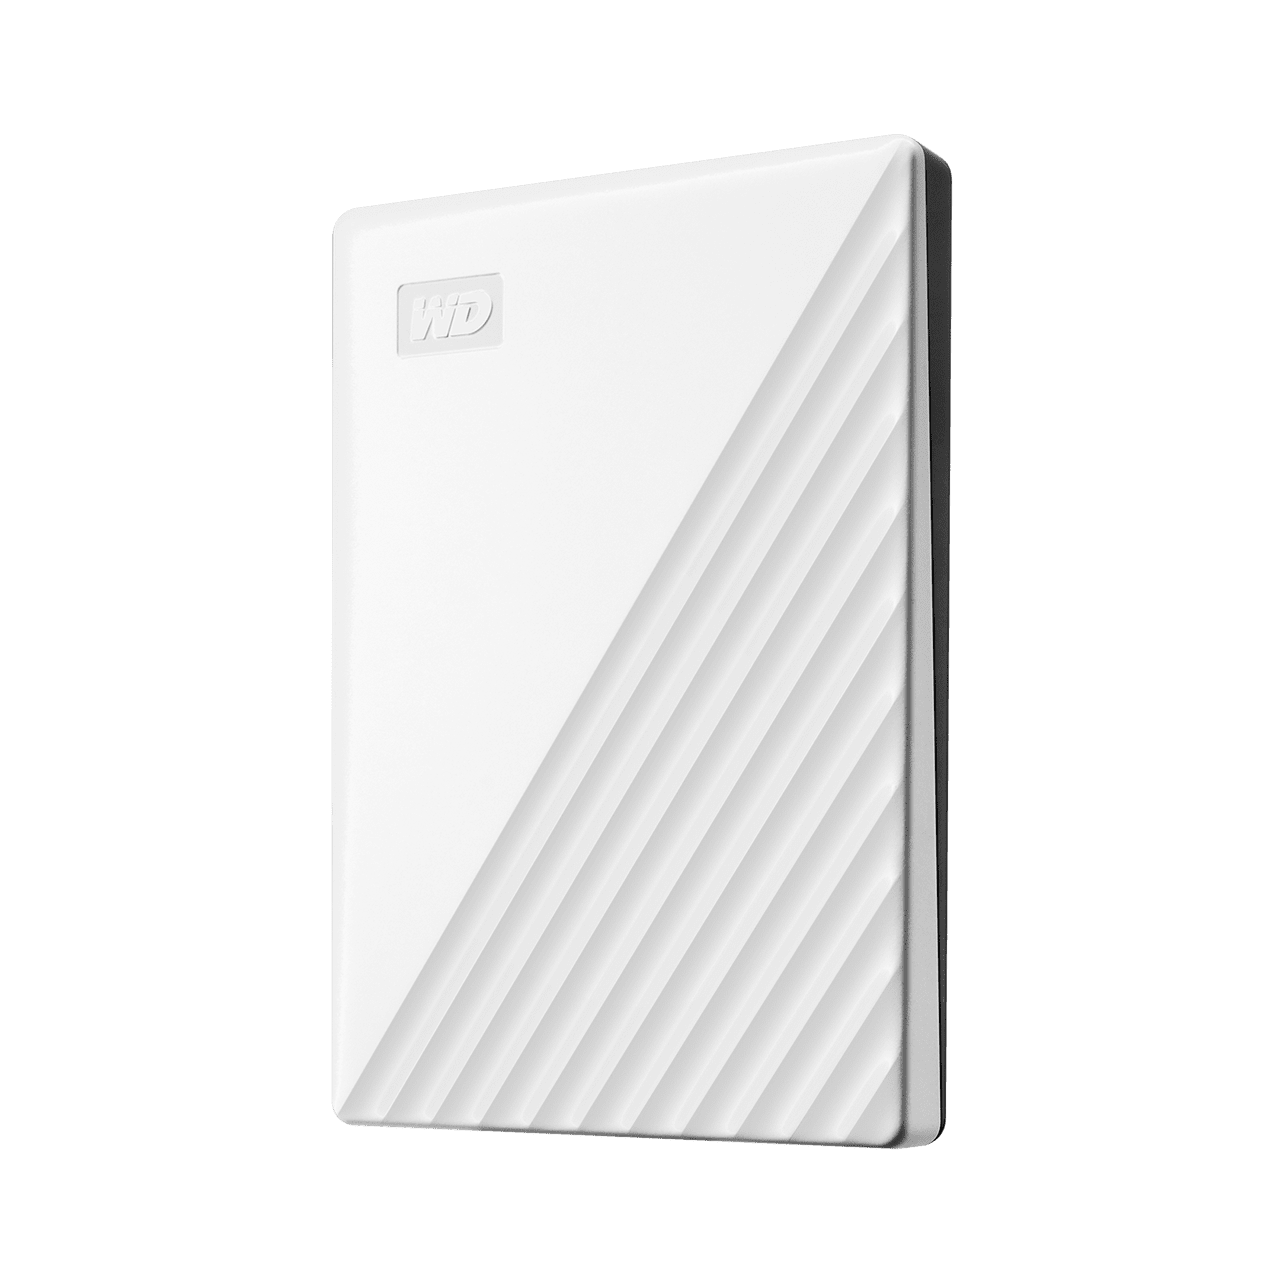 WD Western Digital My Passport 4TB Slim Portable External Hard Disk USB 3.0 With WD Backup Software & Password Protection - White